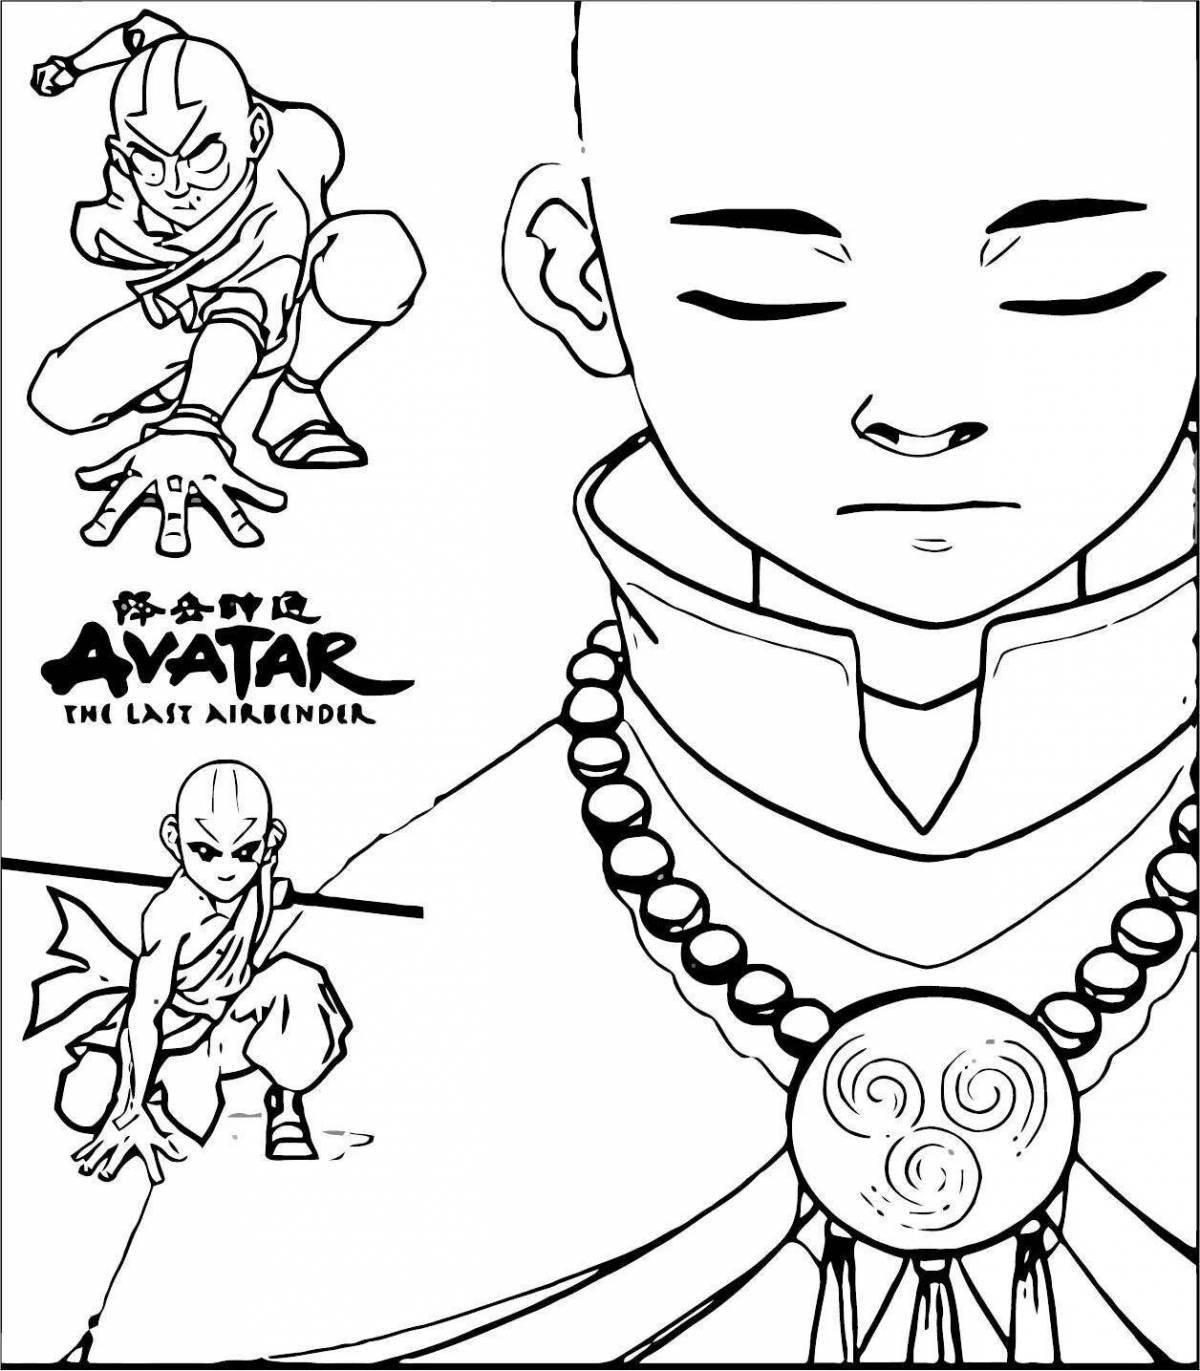 Aang's nice avatar coloring page